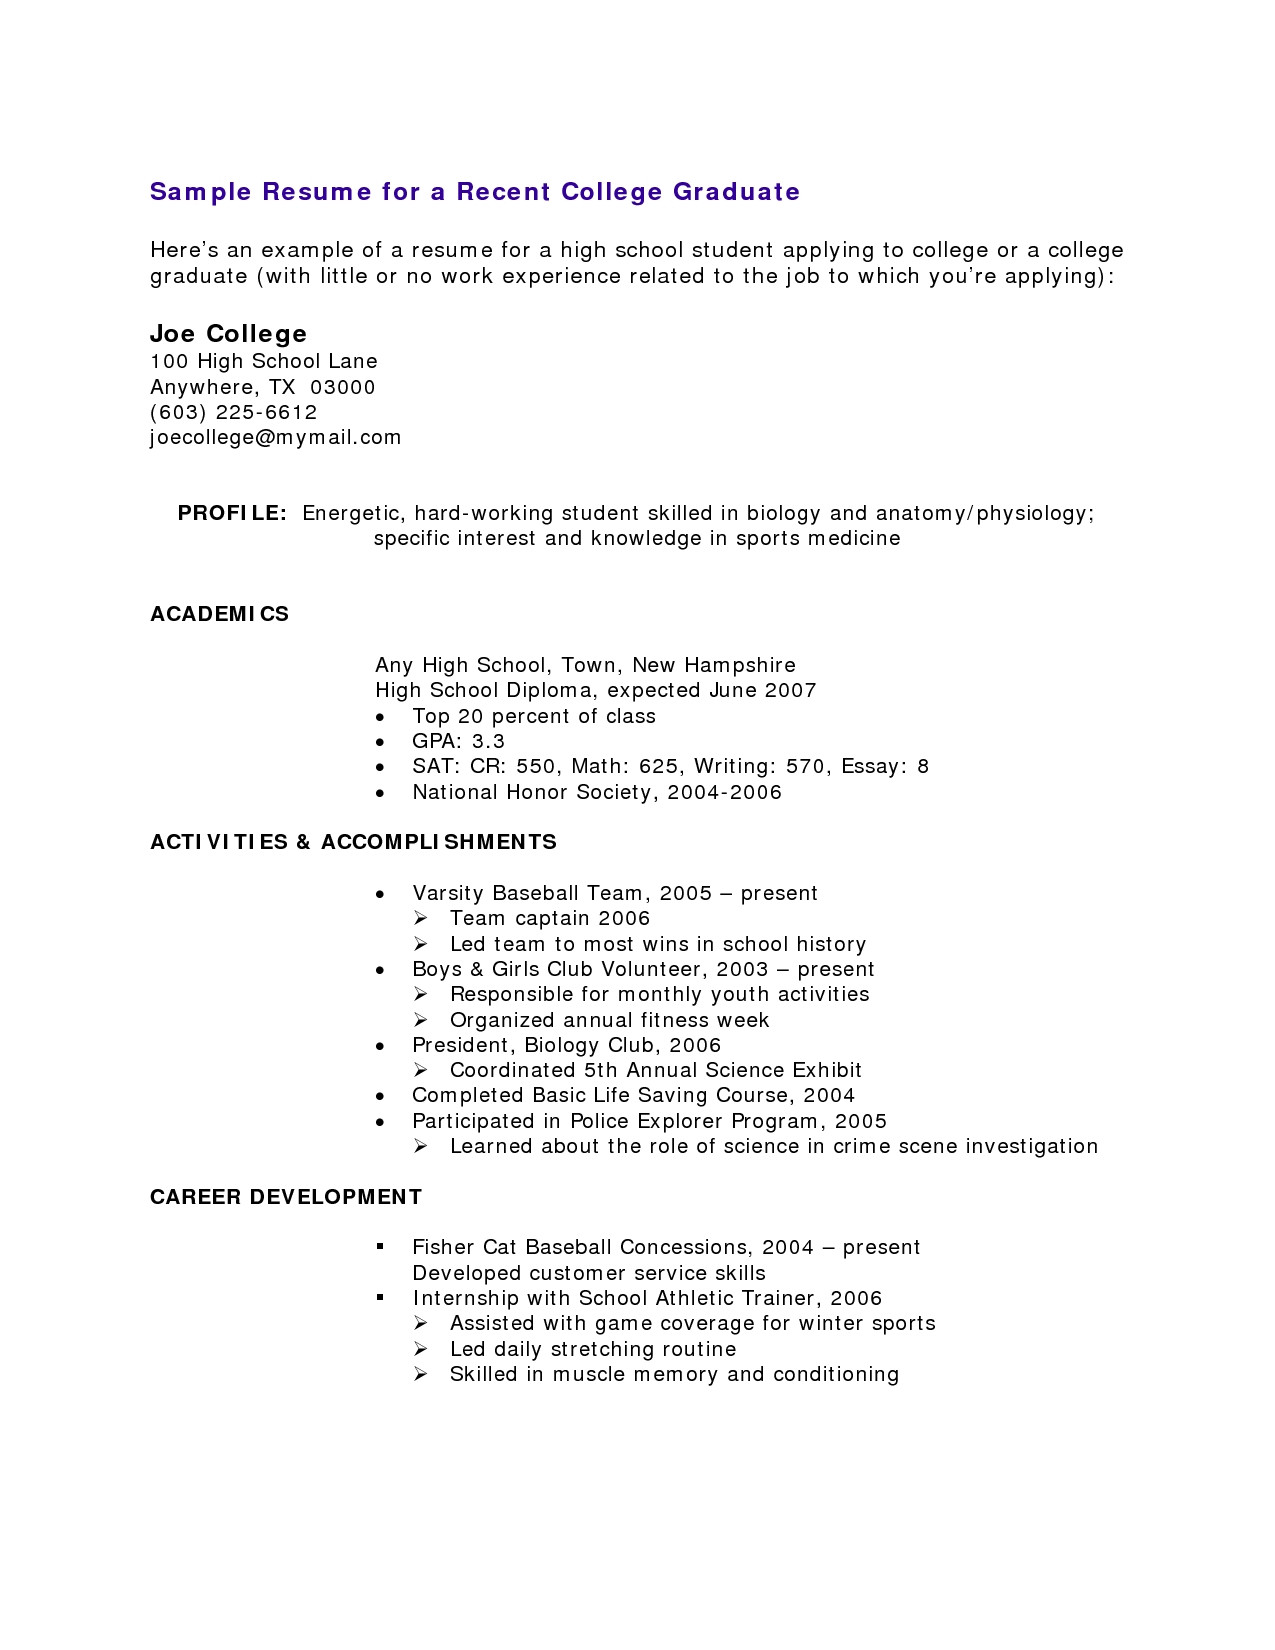 Resume Template for College Student with Little Work Experience How to Make A Resume for Job with No Experience – Easy Resume Sample